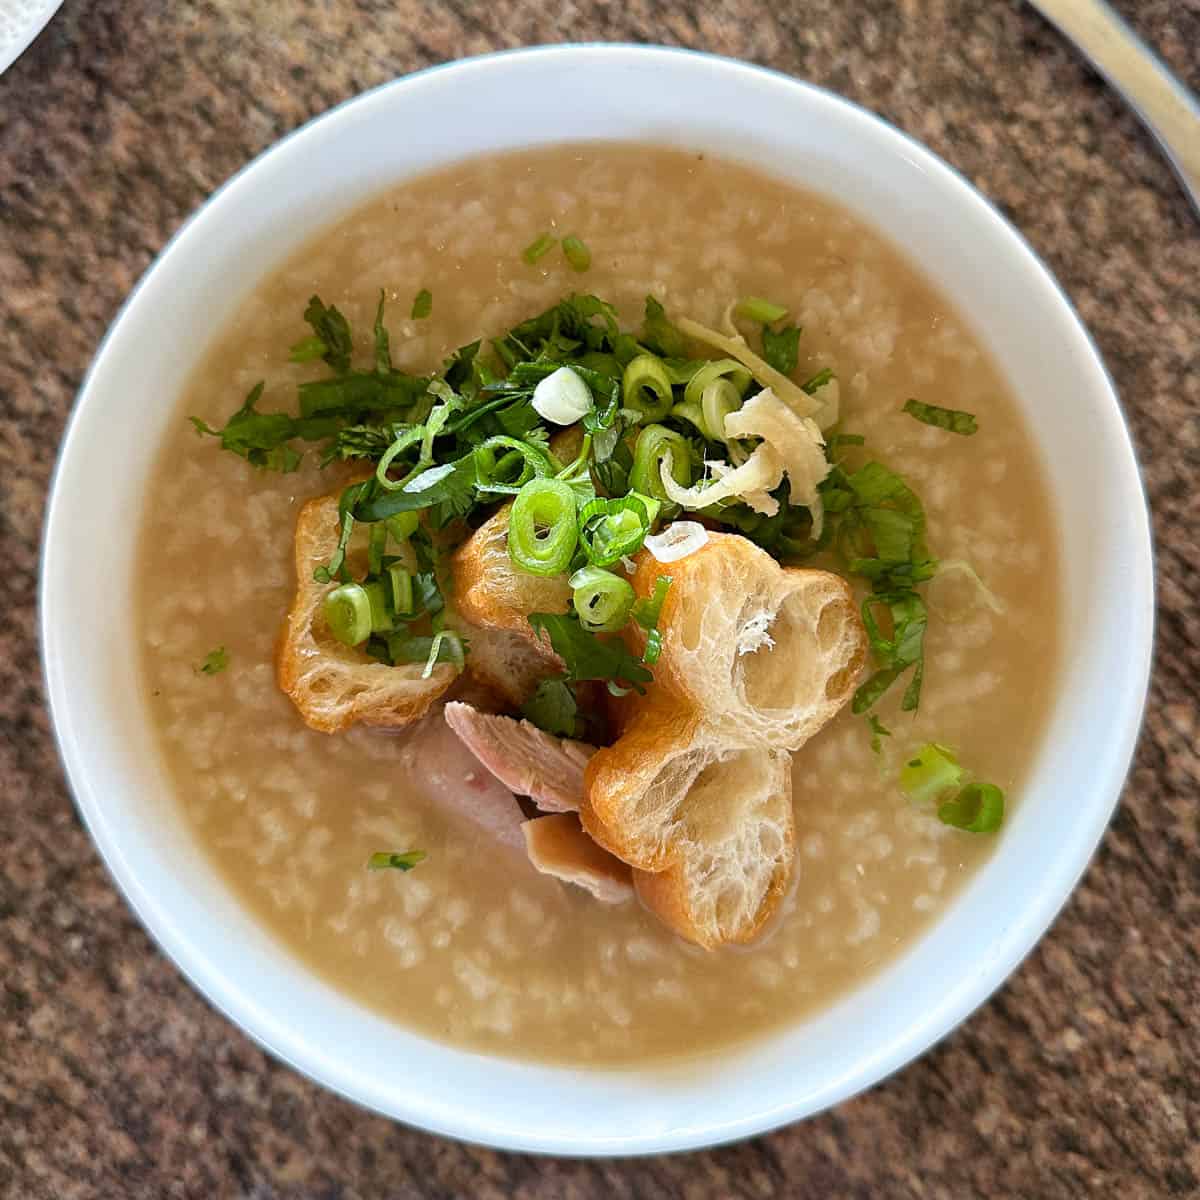 Turkey jook with tasty toppings.